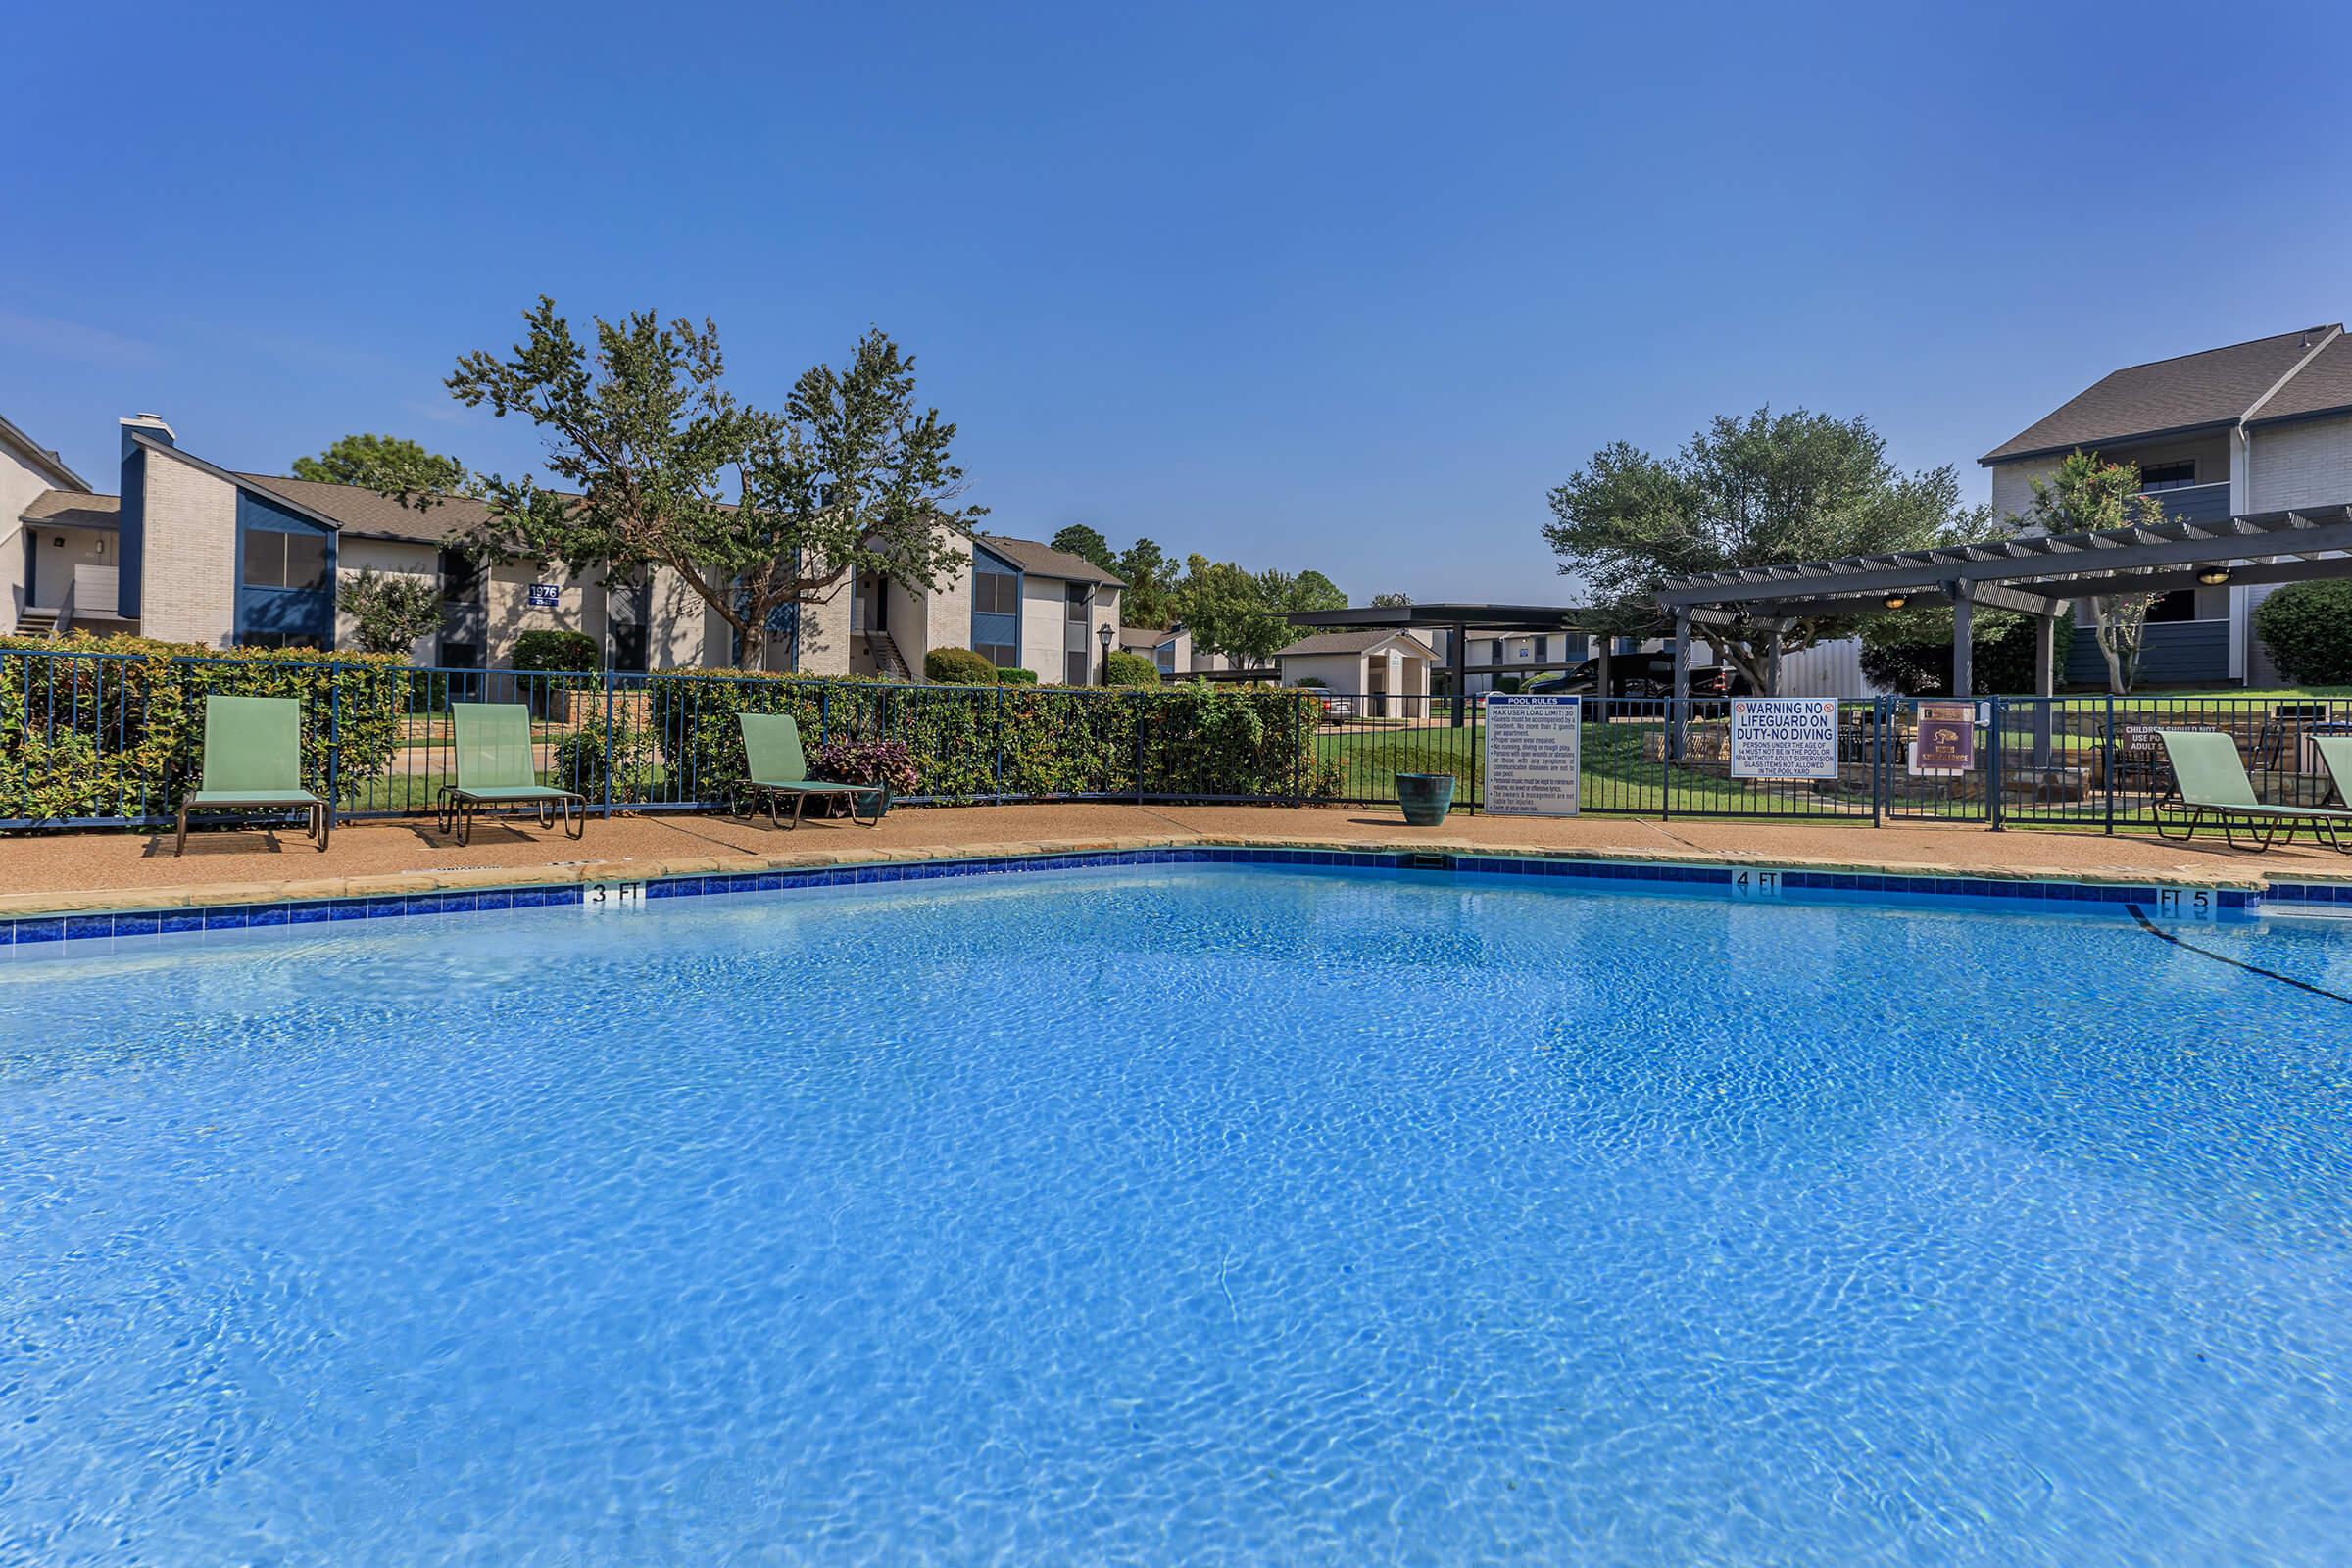 A dazzling pool surrounded by foliage and the Rise Oak Creek apartments.